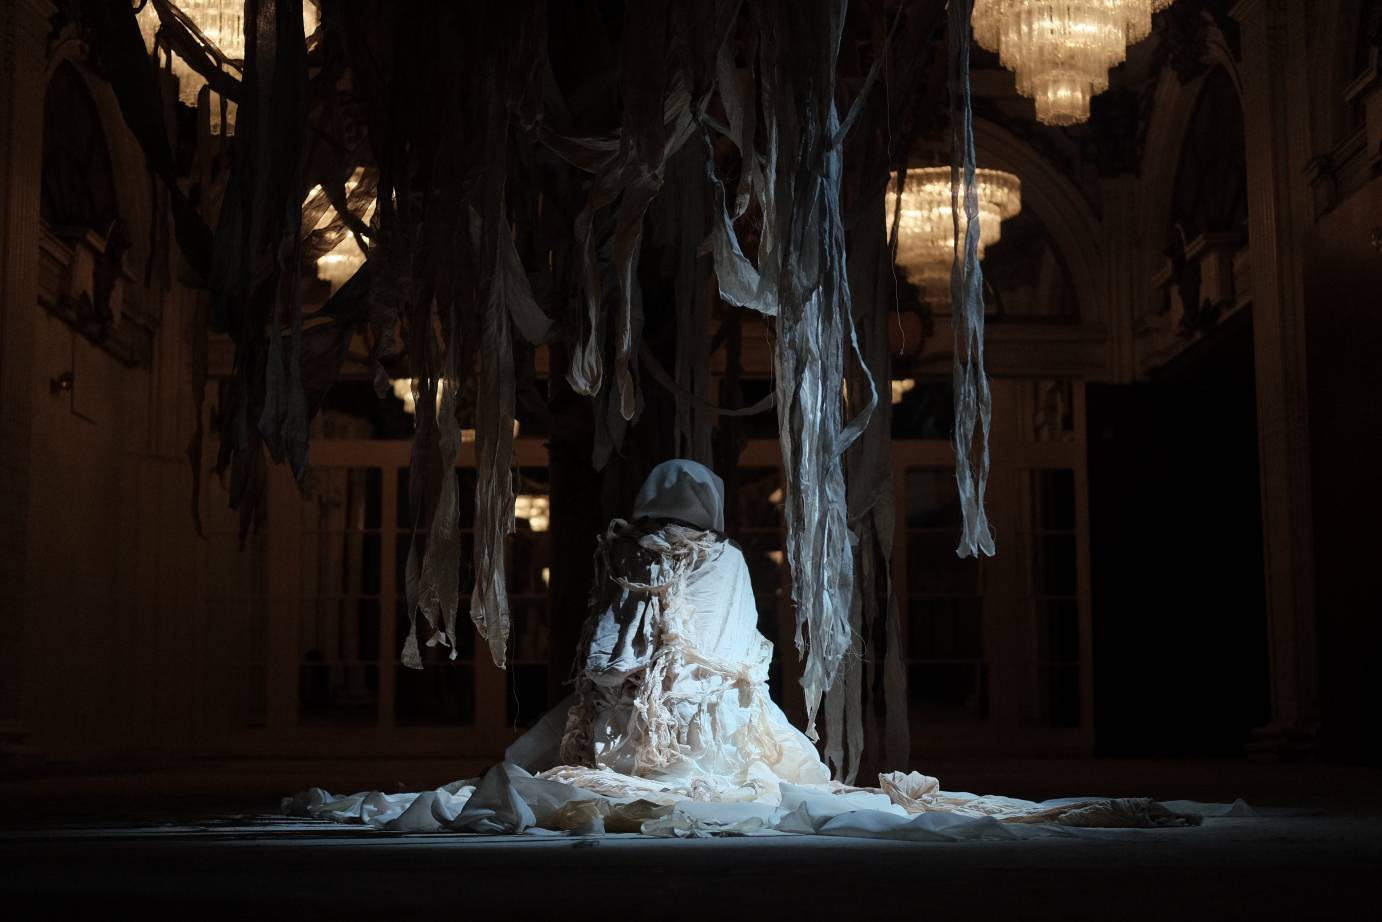 In a ballroom lit by a chandelier, fabric hangs from the ceiling as a woman dressed in rags kneels